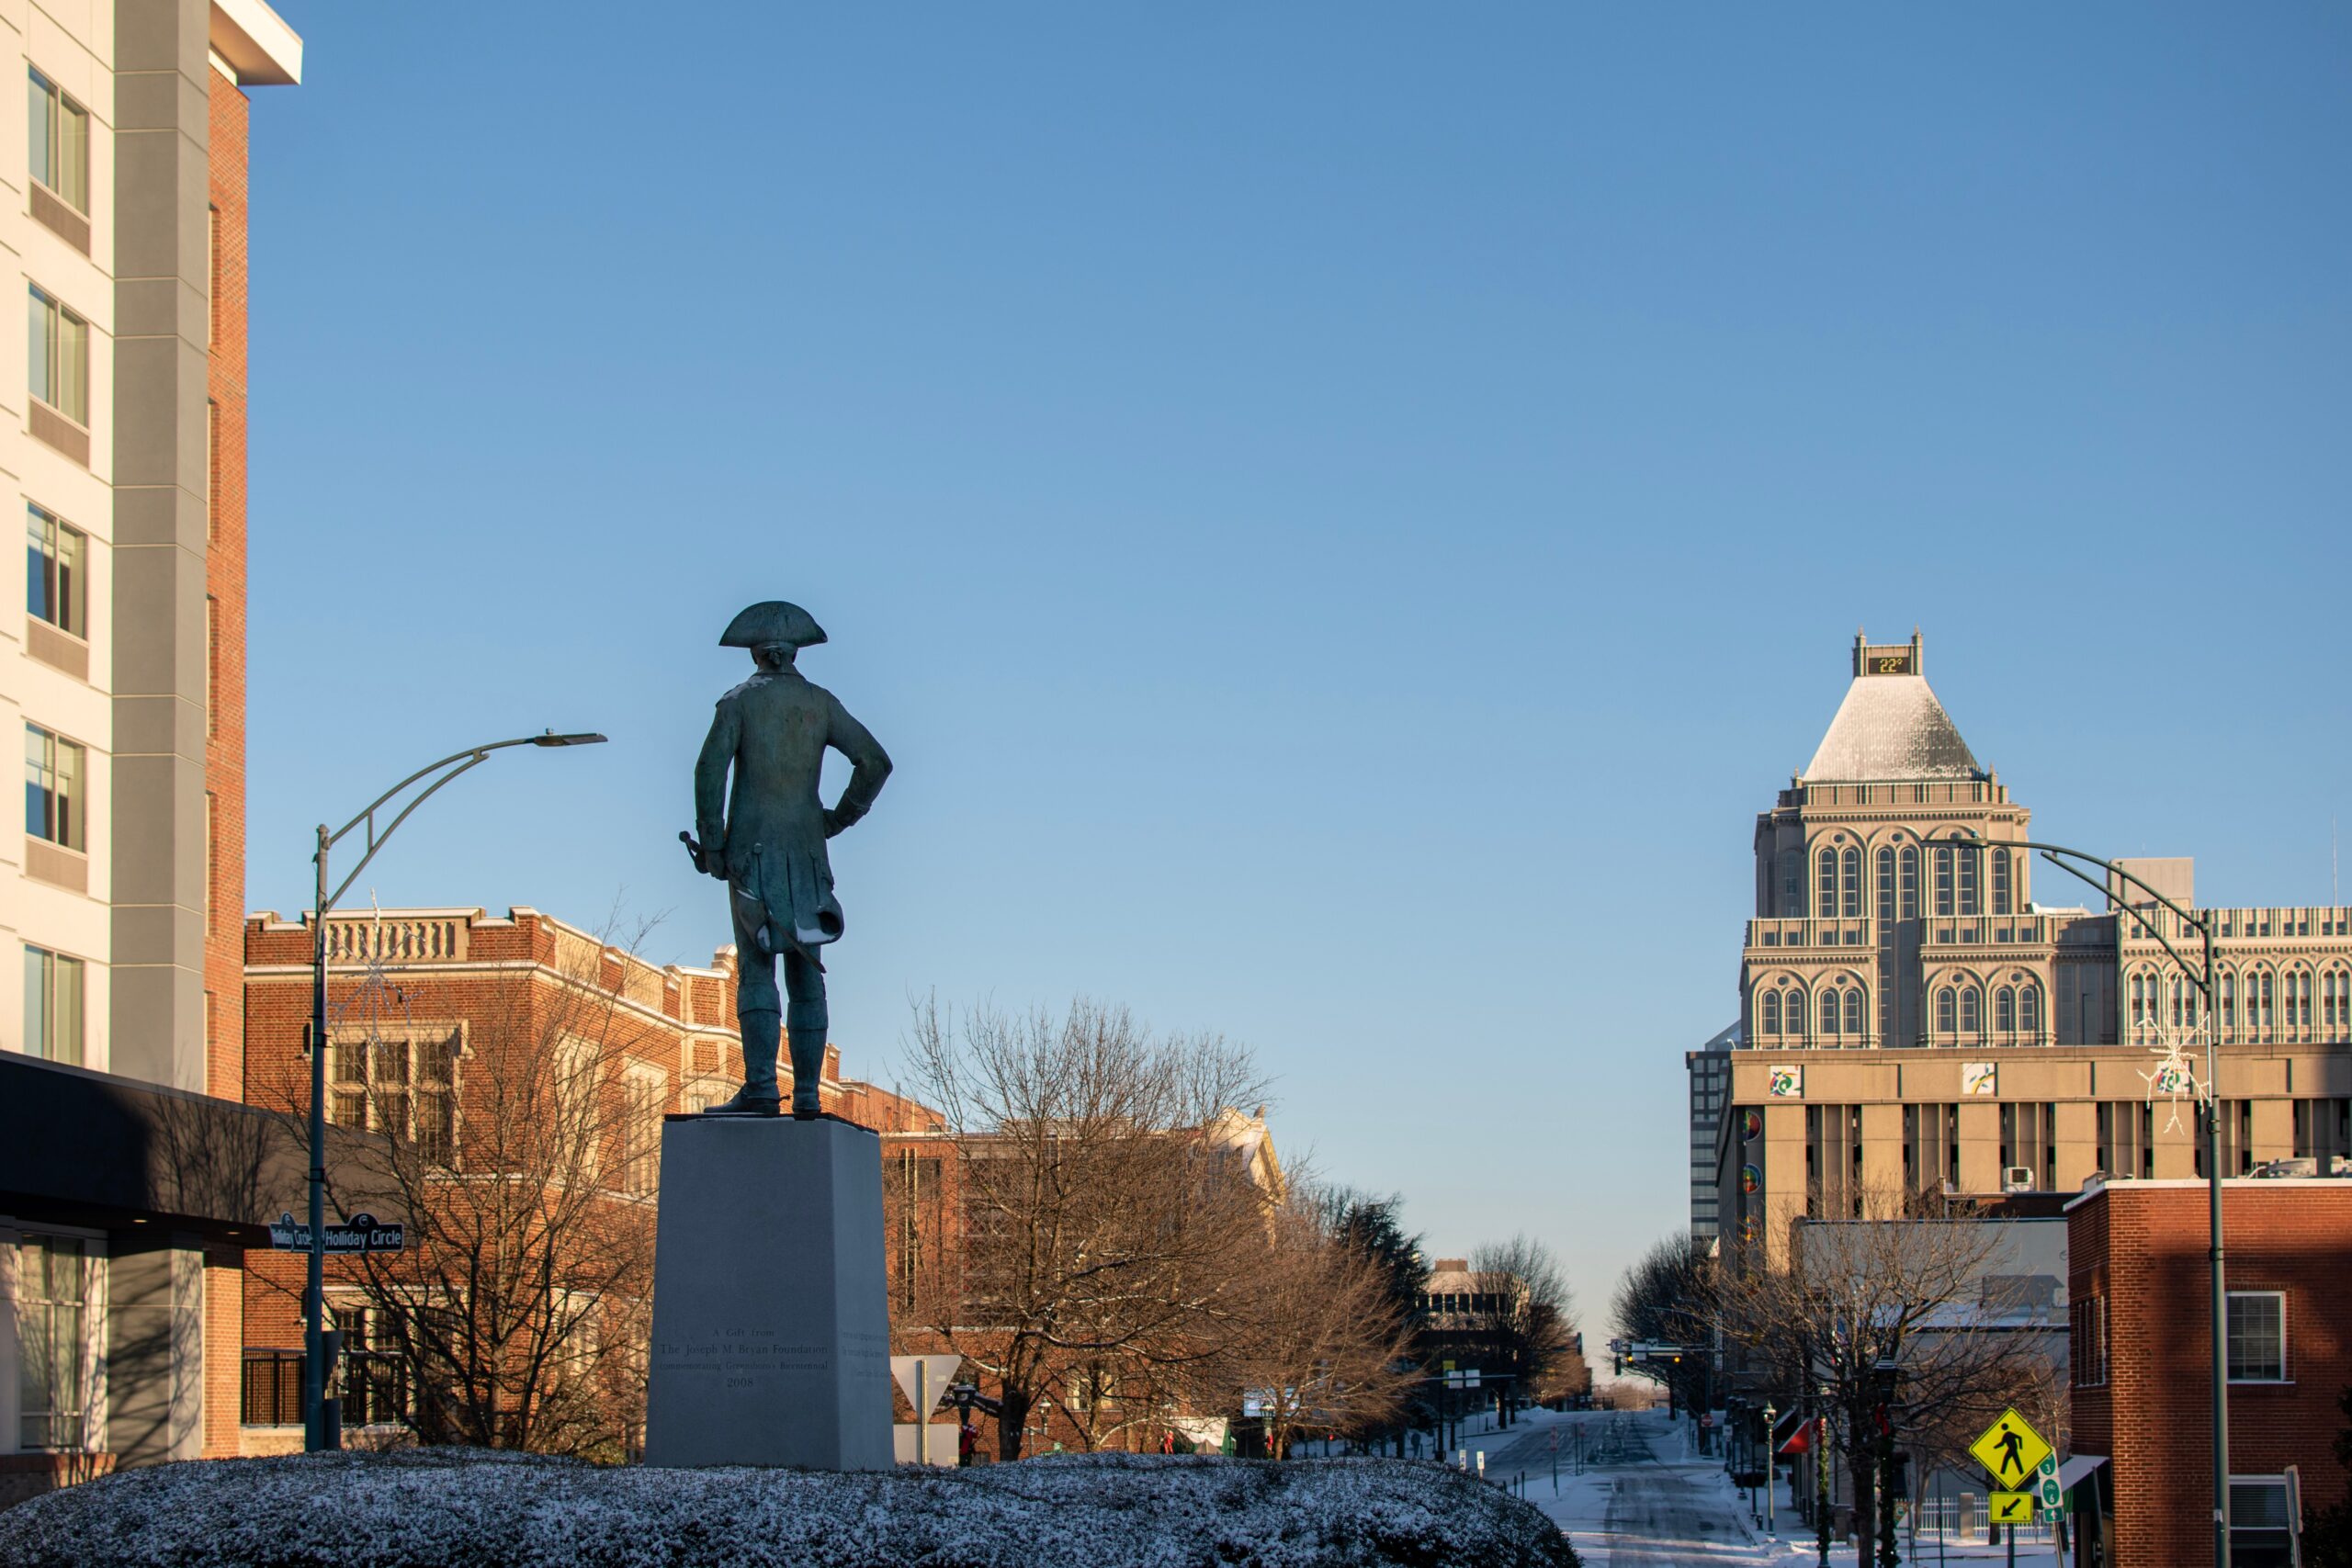 North Carolina has historically significant things to do and see. Check out the two mist popular sites in the city. 
Pictured: Nathanael Green (Revolutionary War hero) statue in downtown Greensboro, North Carolina during the winter 